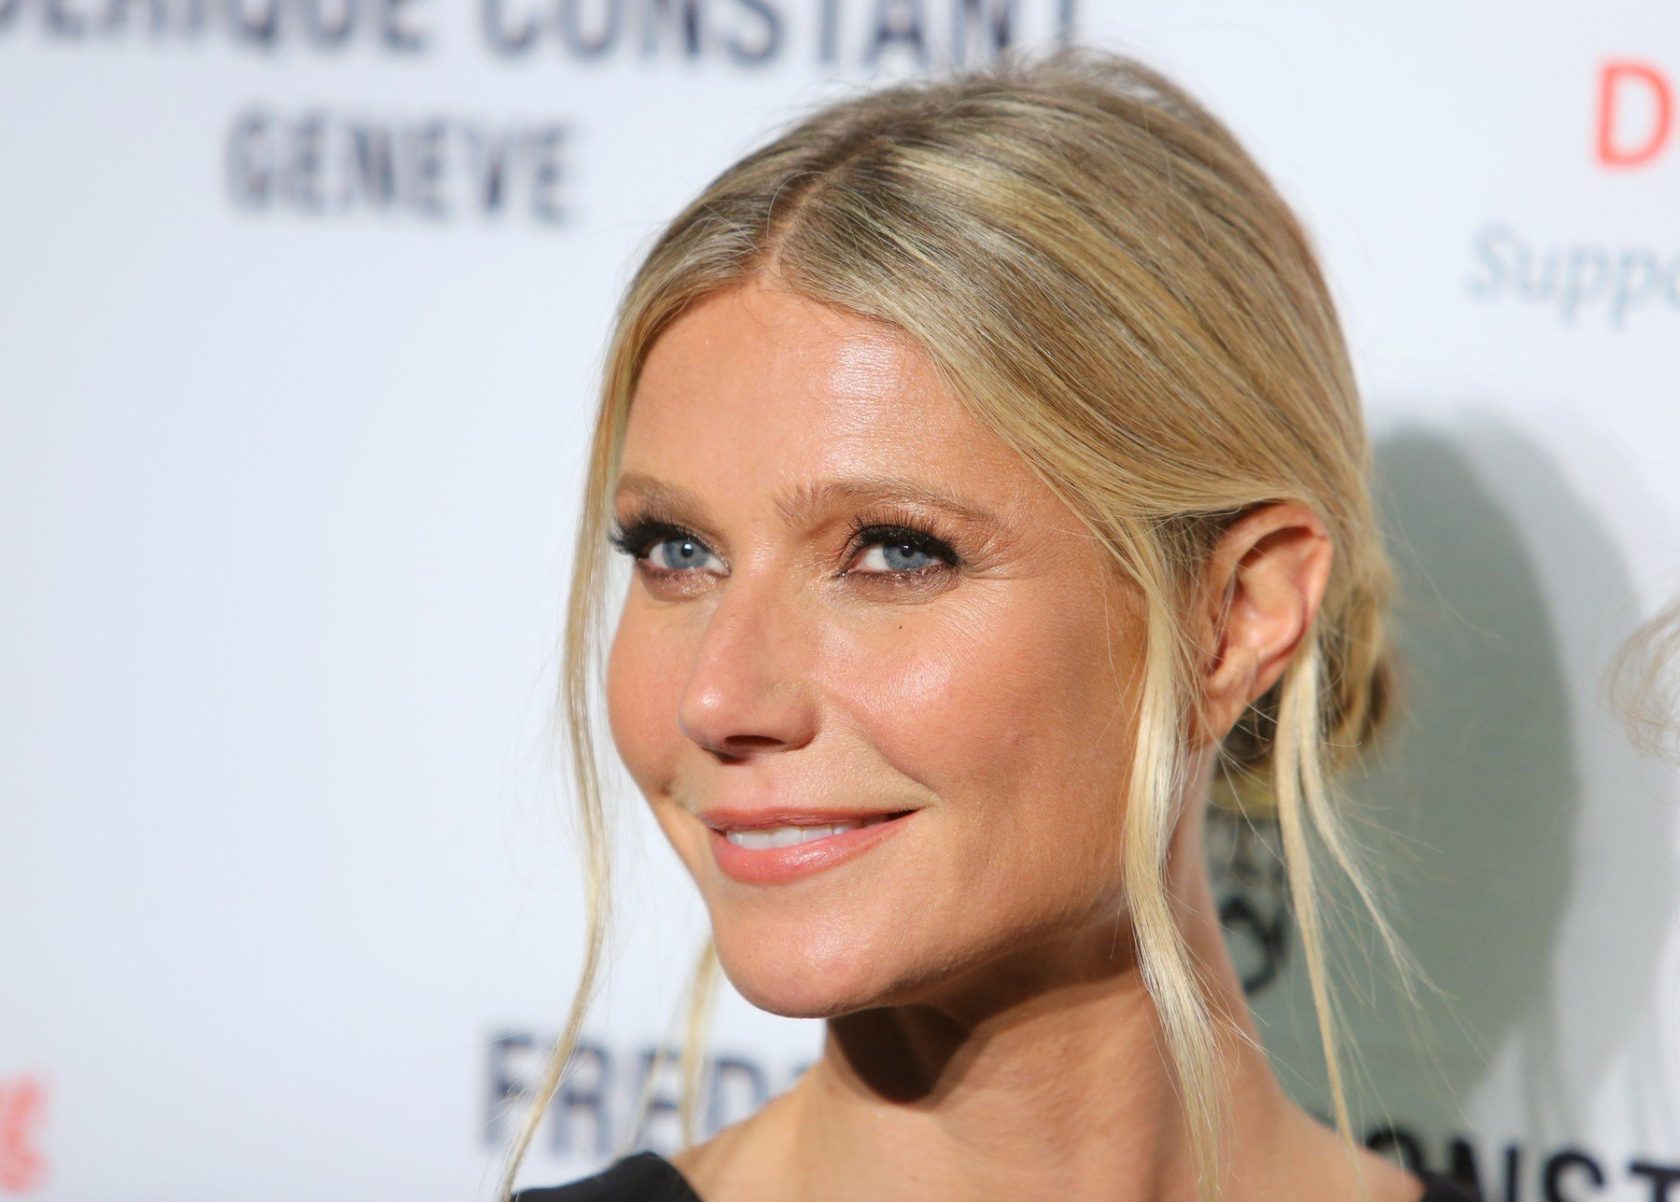 November 2 2016, New York City Actress Gwyneth Paltrow attends the Frederique Constant Horological Smartwatch launch at Spring Studios on November 2, 2016 in New York City. By Line: Philip Vaughan/ACE Pictures ACE Pictures Inc Tel: 6467670430 Email: info@acepixs.com, Image: 304619194, License: Rights-managed, Restrictions: , Model Release: no, Credit line: Profimedia, Acepixs